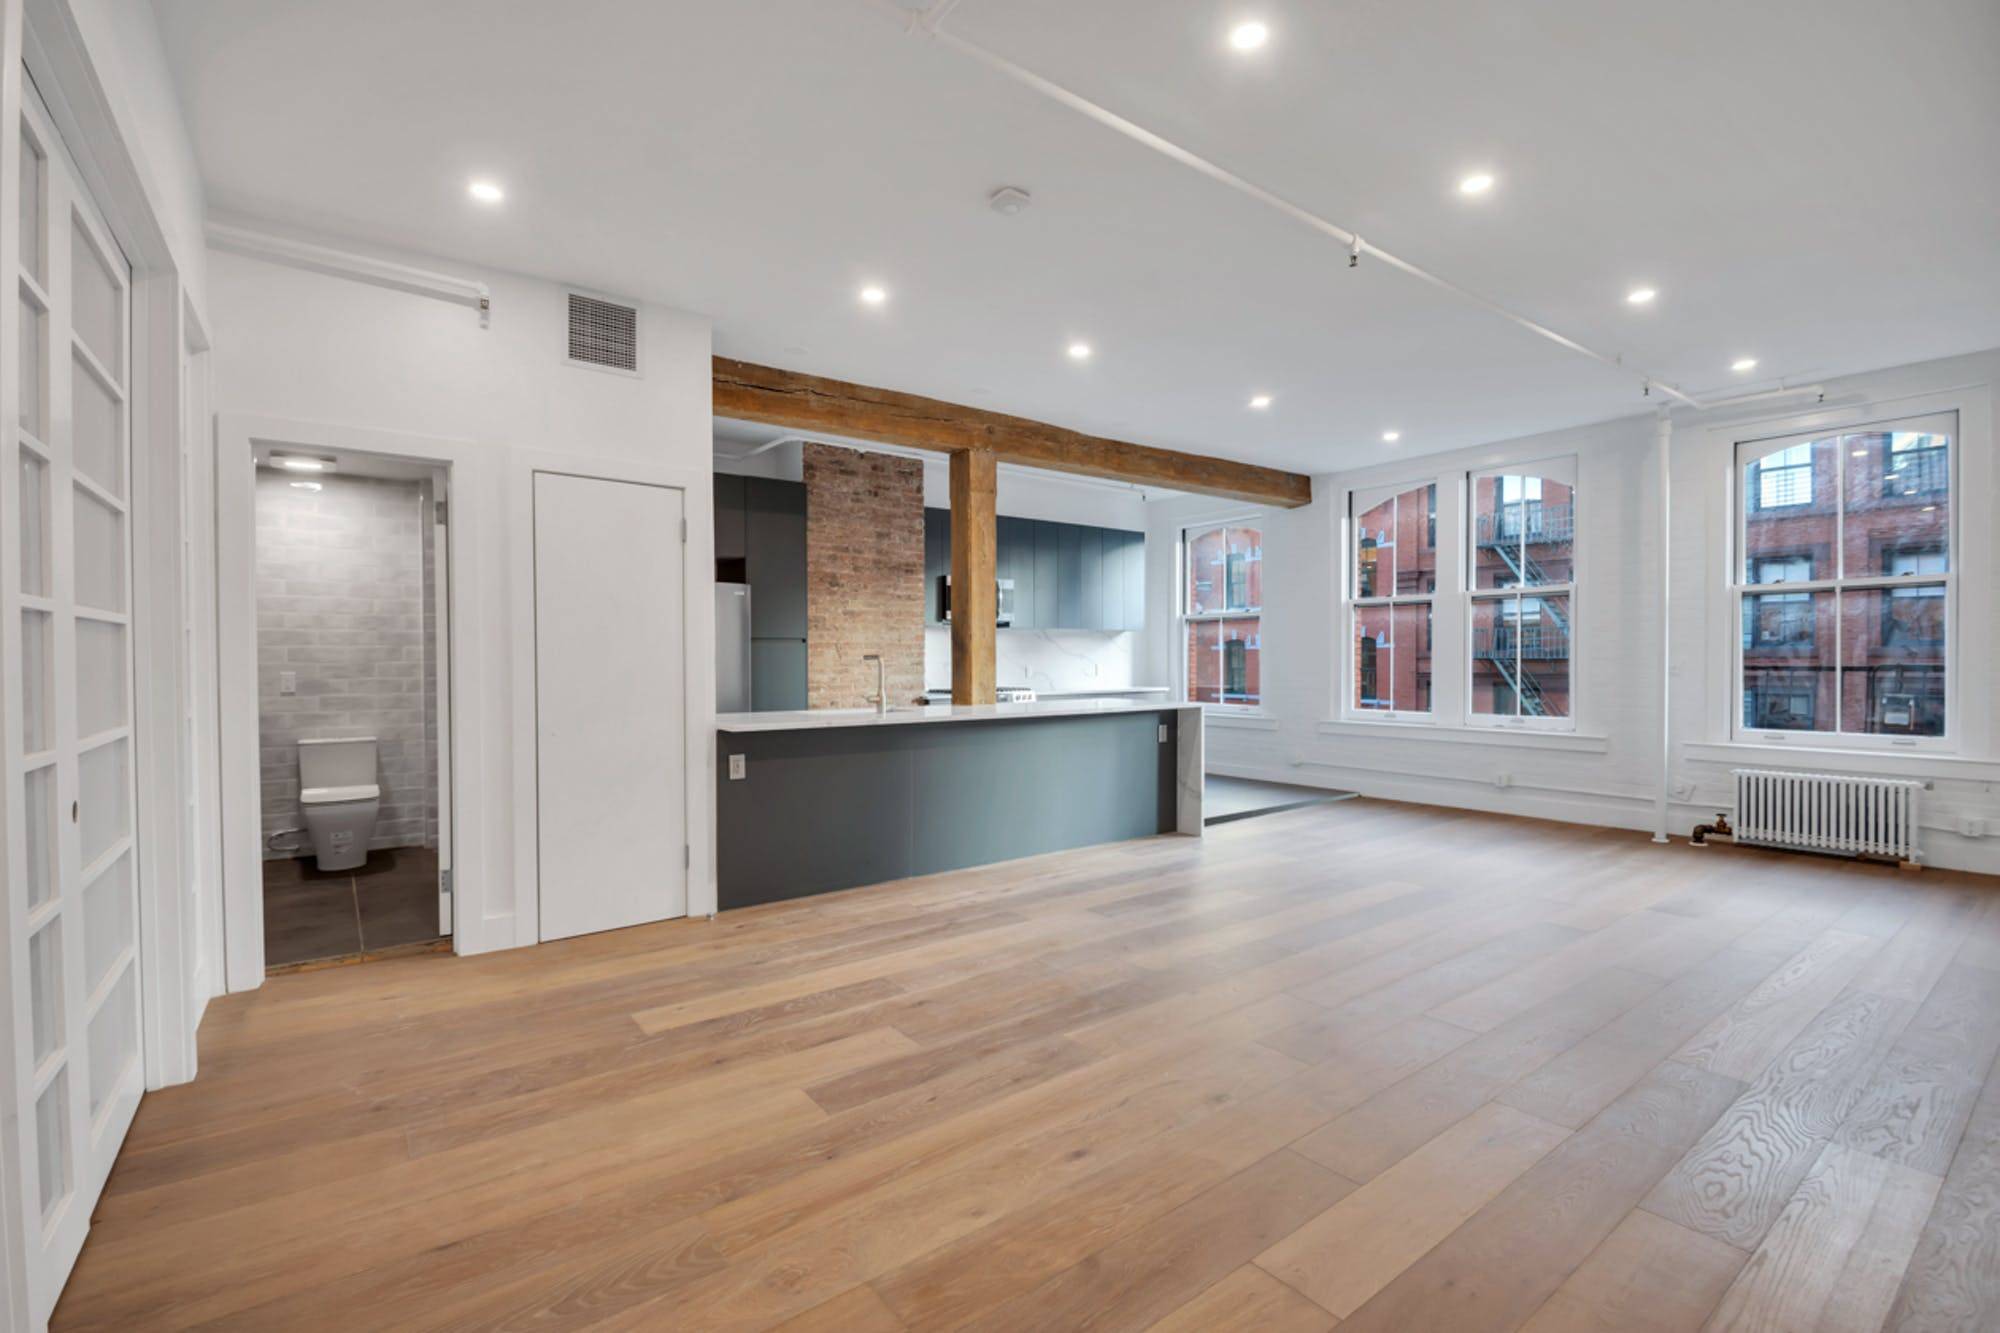 Welcome to 186 Franklin Street, a large 1295 square foot loft that seamlessly combines historical charm and character with contemporary design and luxury.